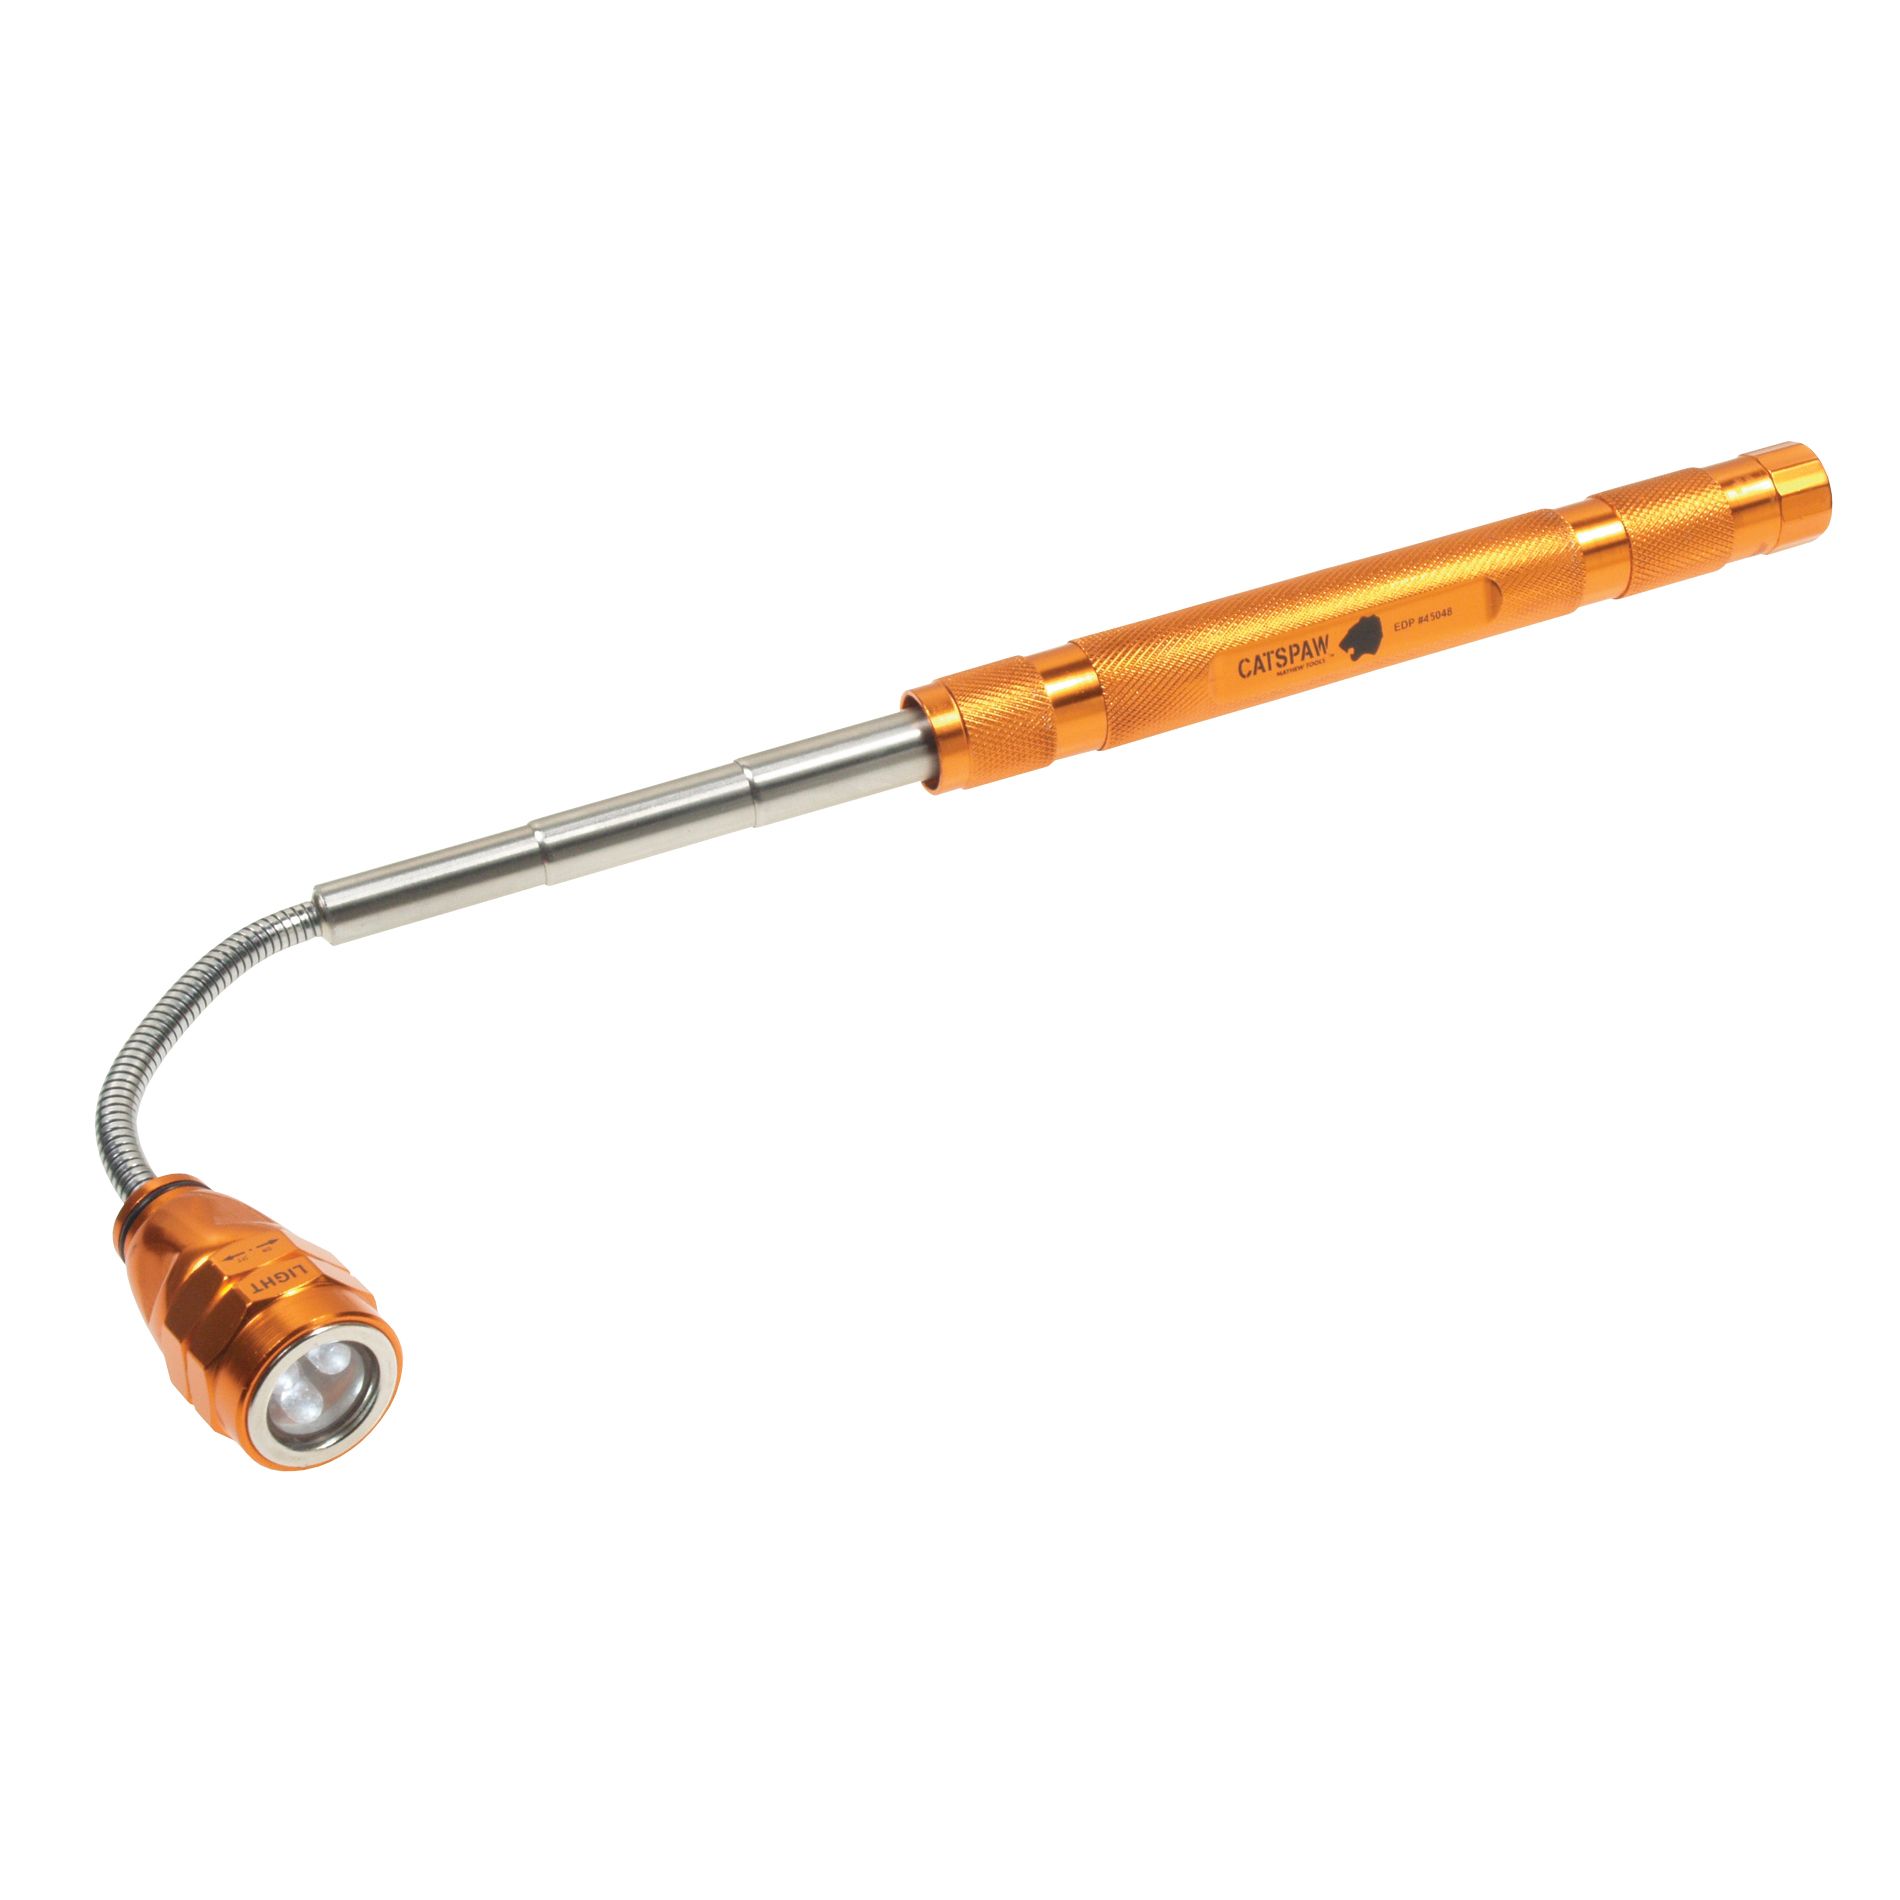 Mayhew Catspaw&trade; Flexible Lighted Pick Up Tool